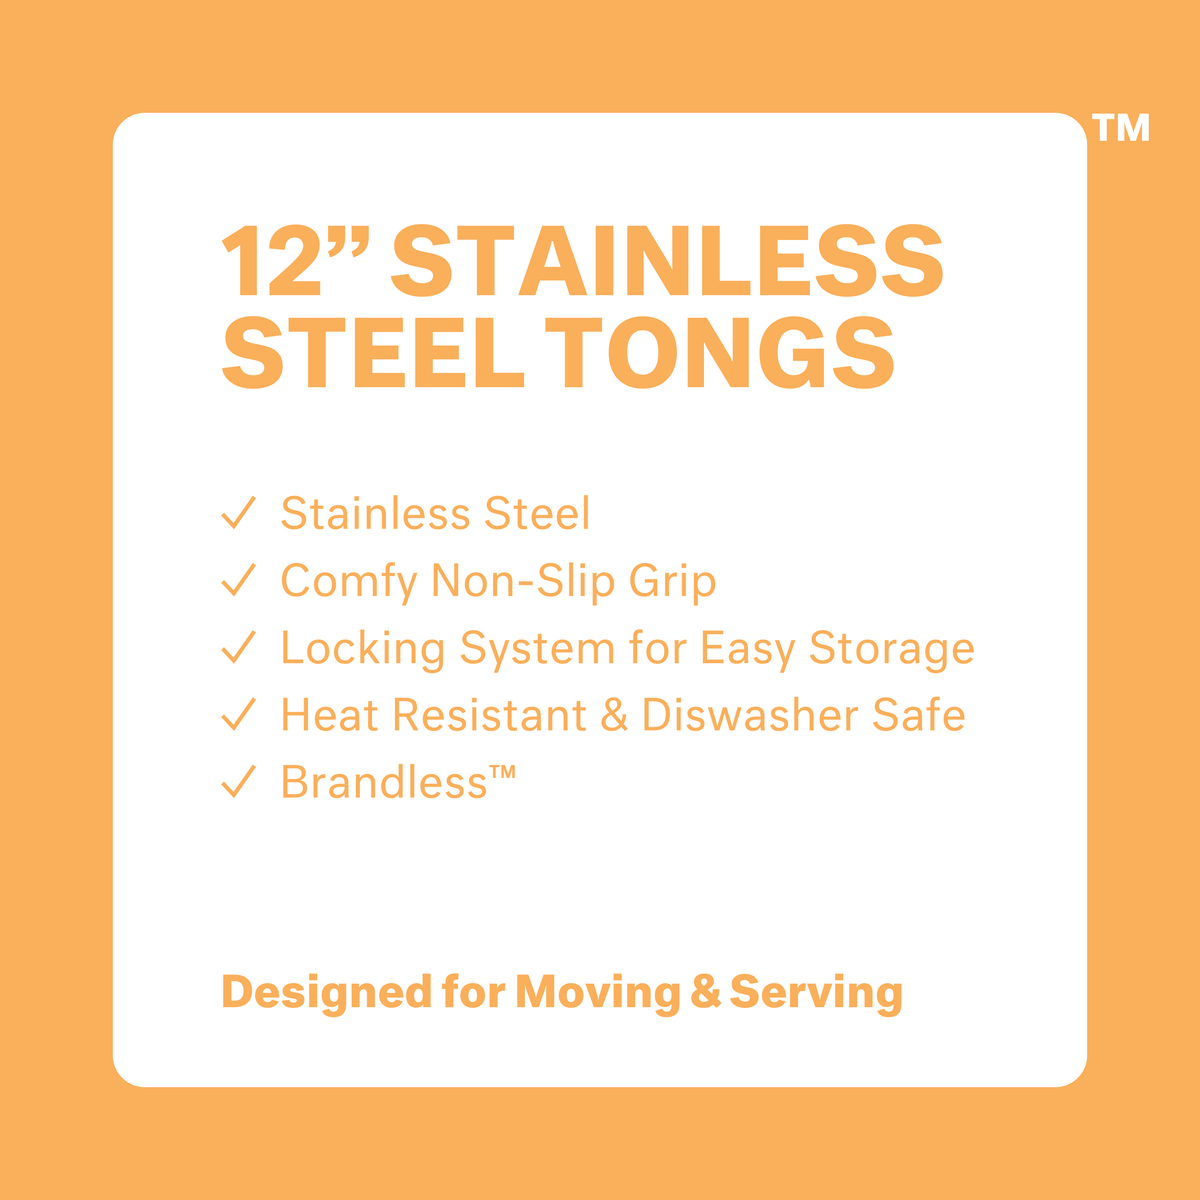 12 inch stainless steel tongs. Stainless steel. Comfy non-slip grip. Locking system for easy storage. Heat resistant &amp; dishwasher safe. Brandless. Designed for Moving &amp; Serving.